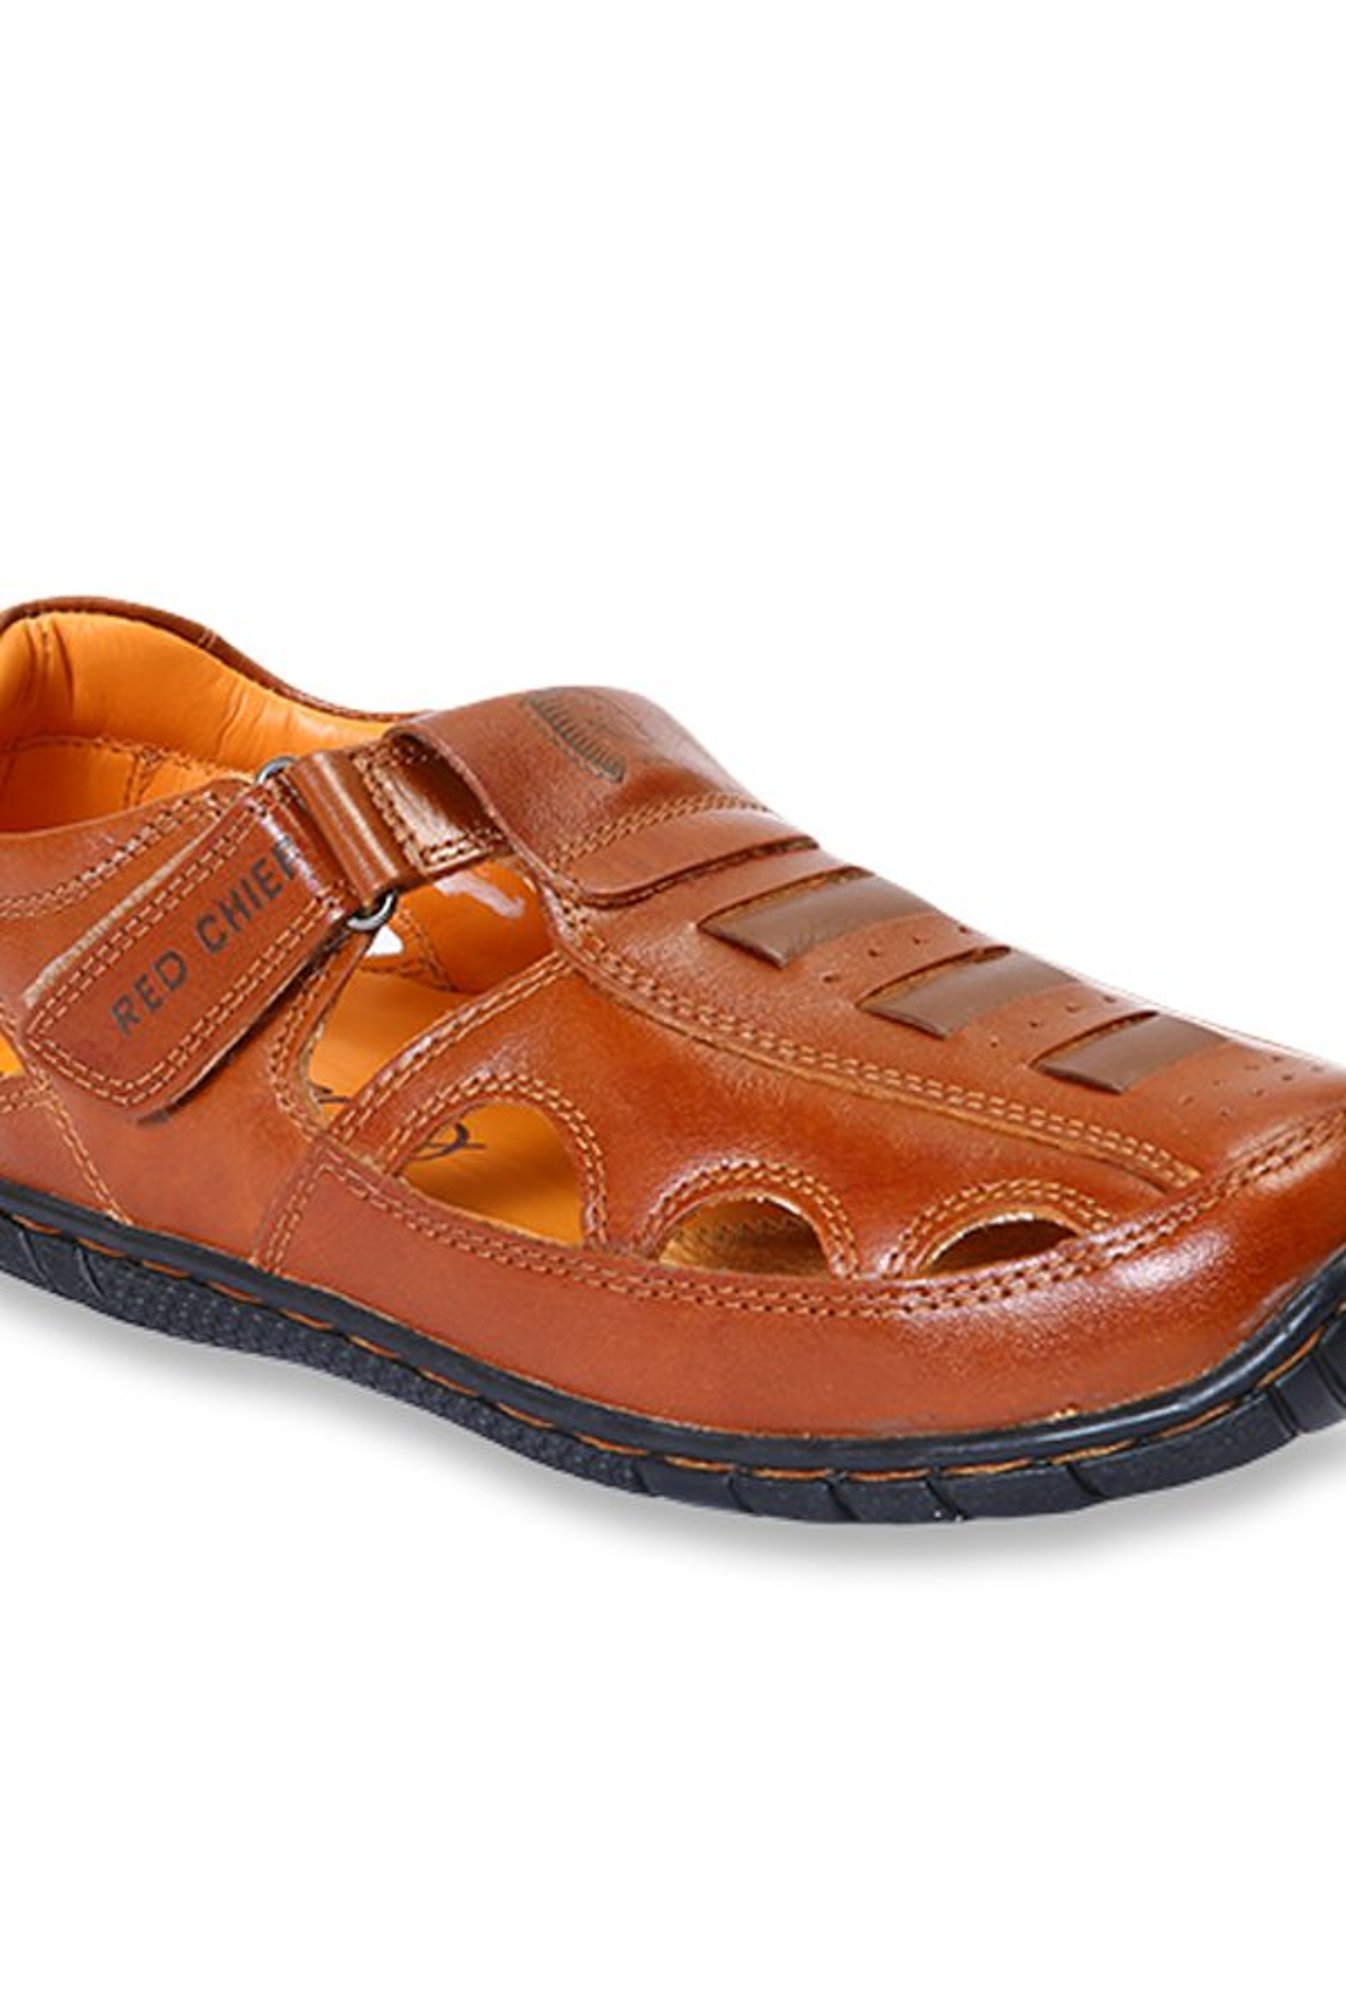 Red Chief Men's NDM Black Leather Sandal (RC0317 045), 6 UK : Amazon.in:  Fashion